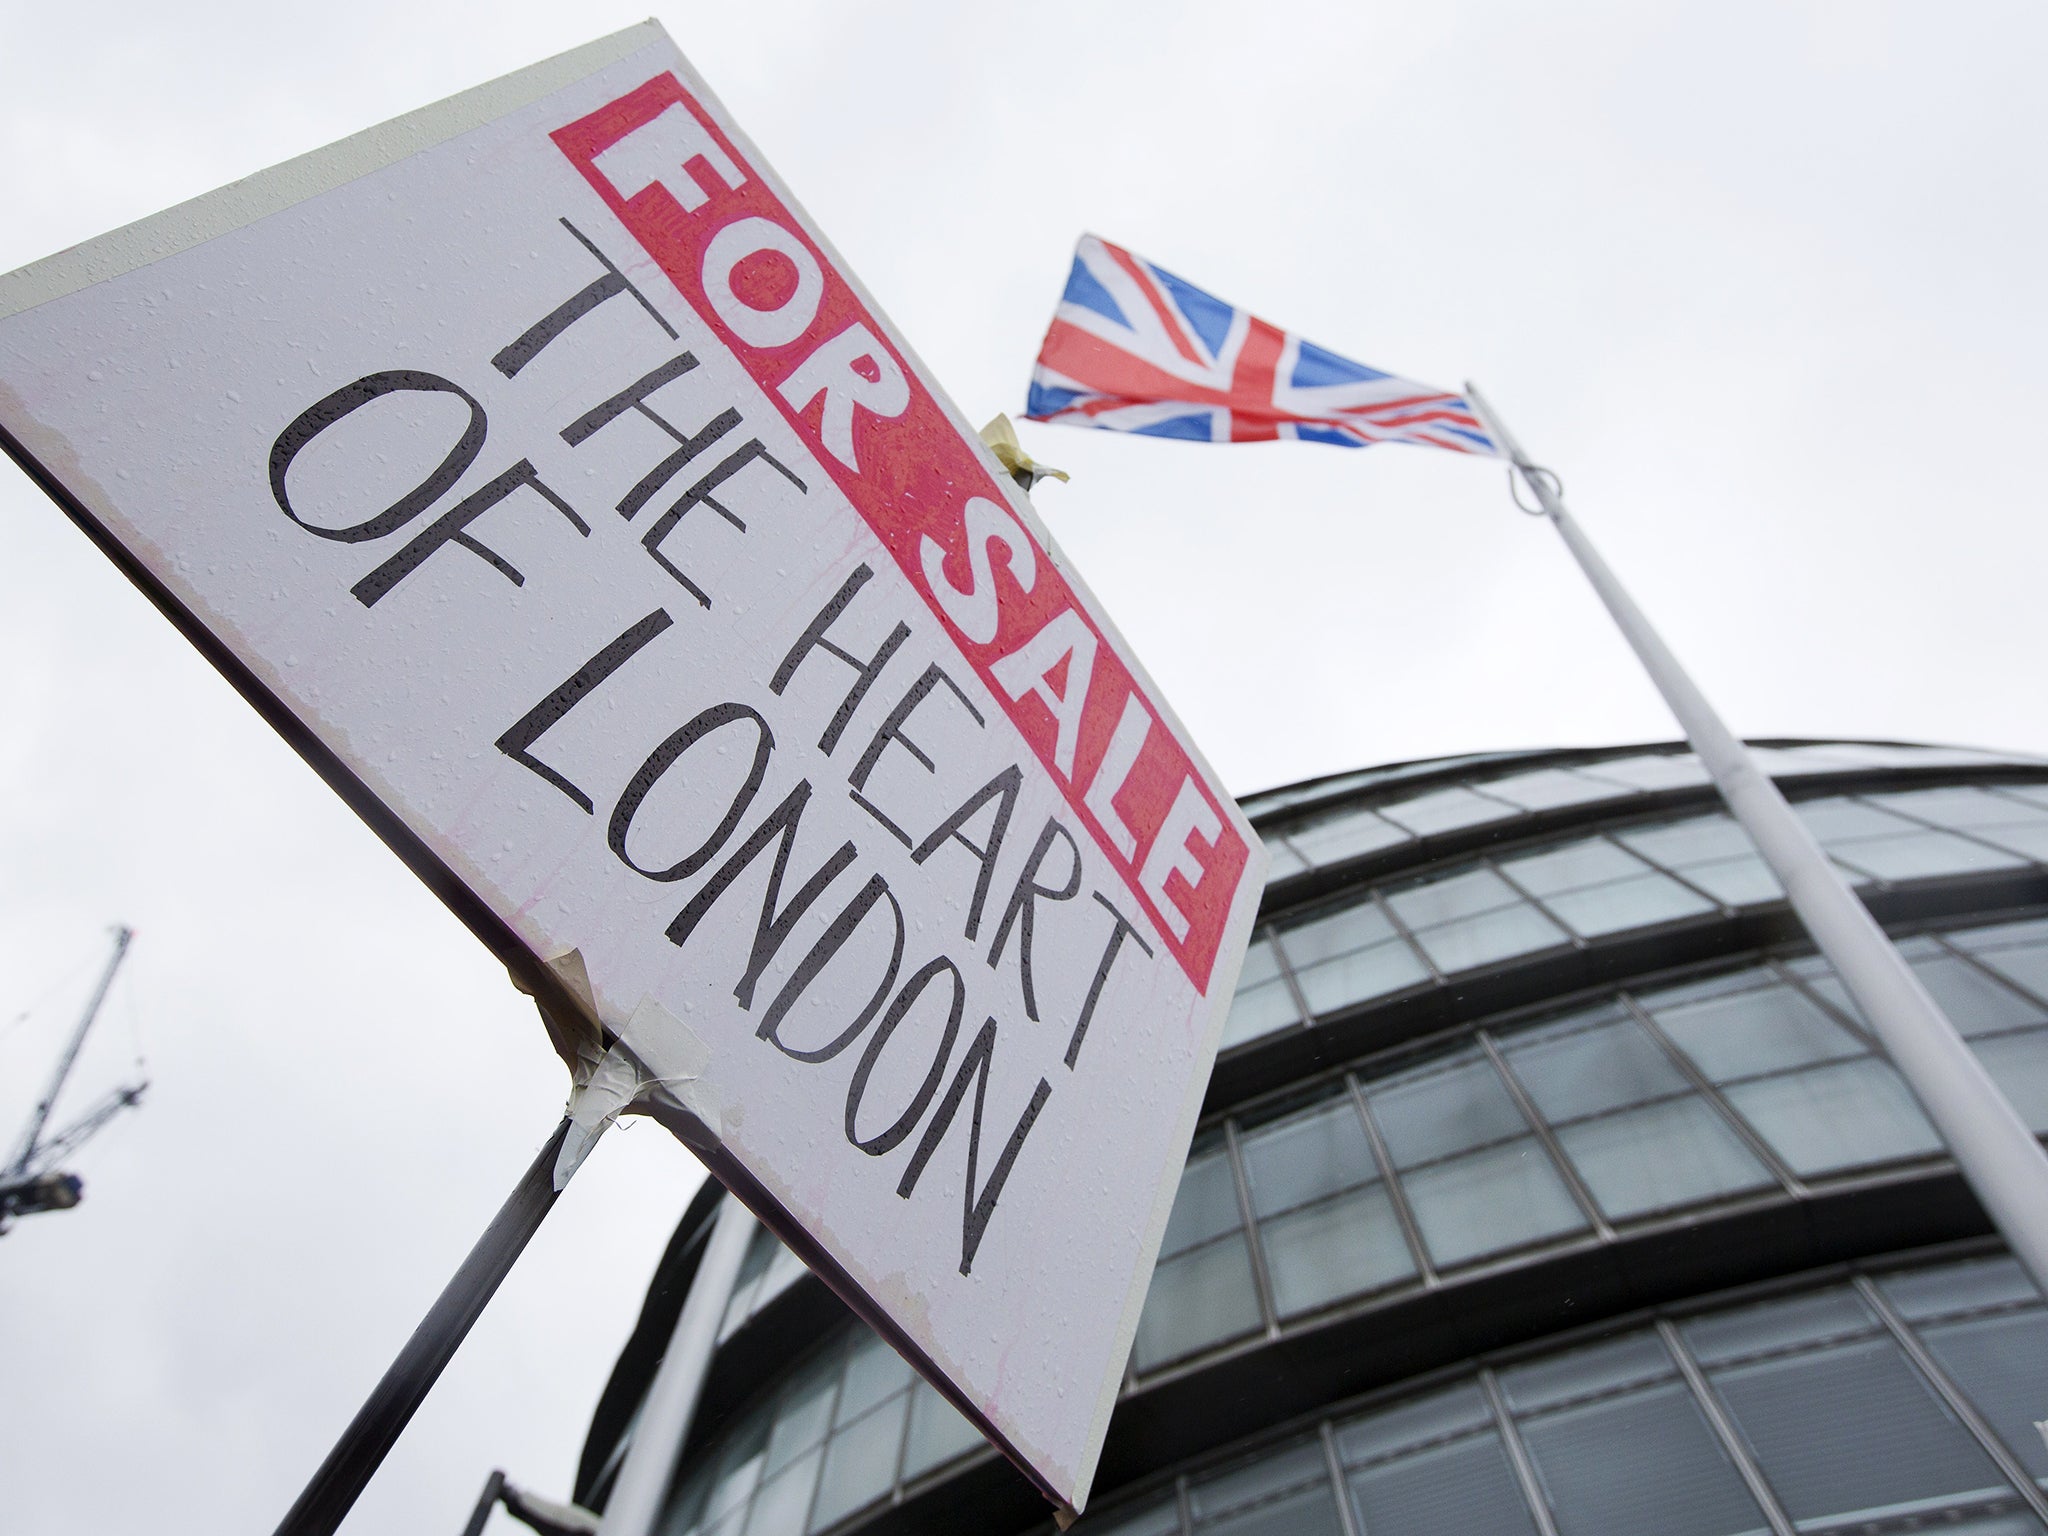 Housing issues have dominated the policy announcements from both London mayoral candidates